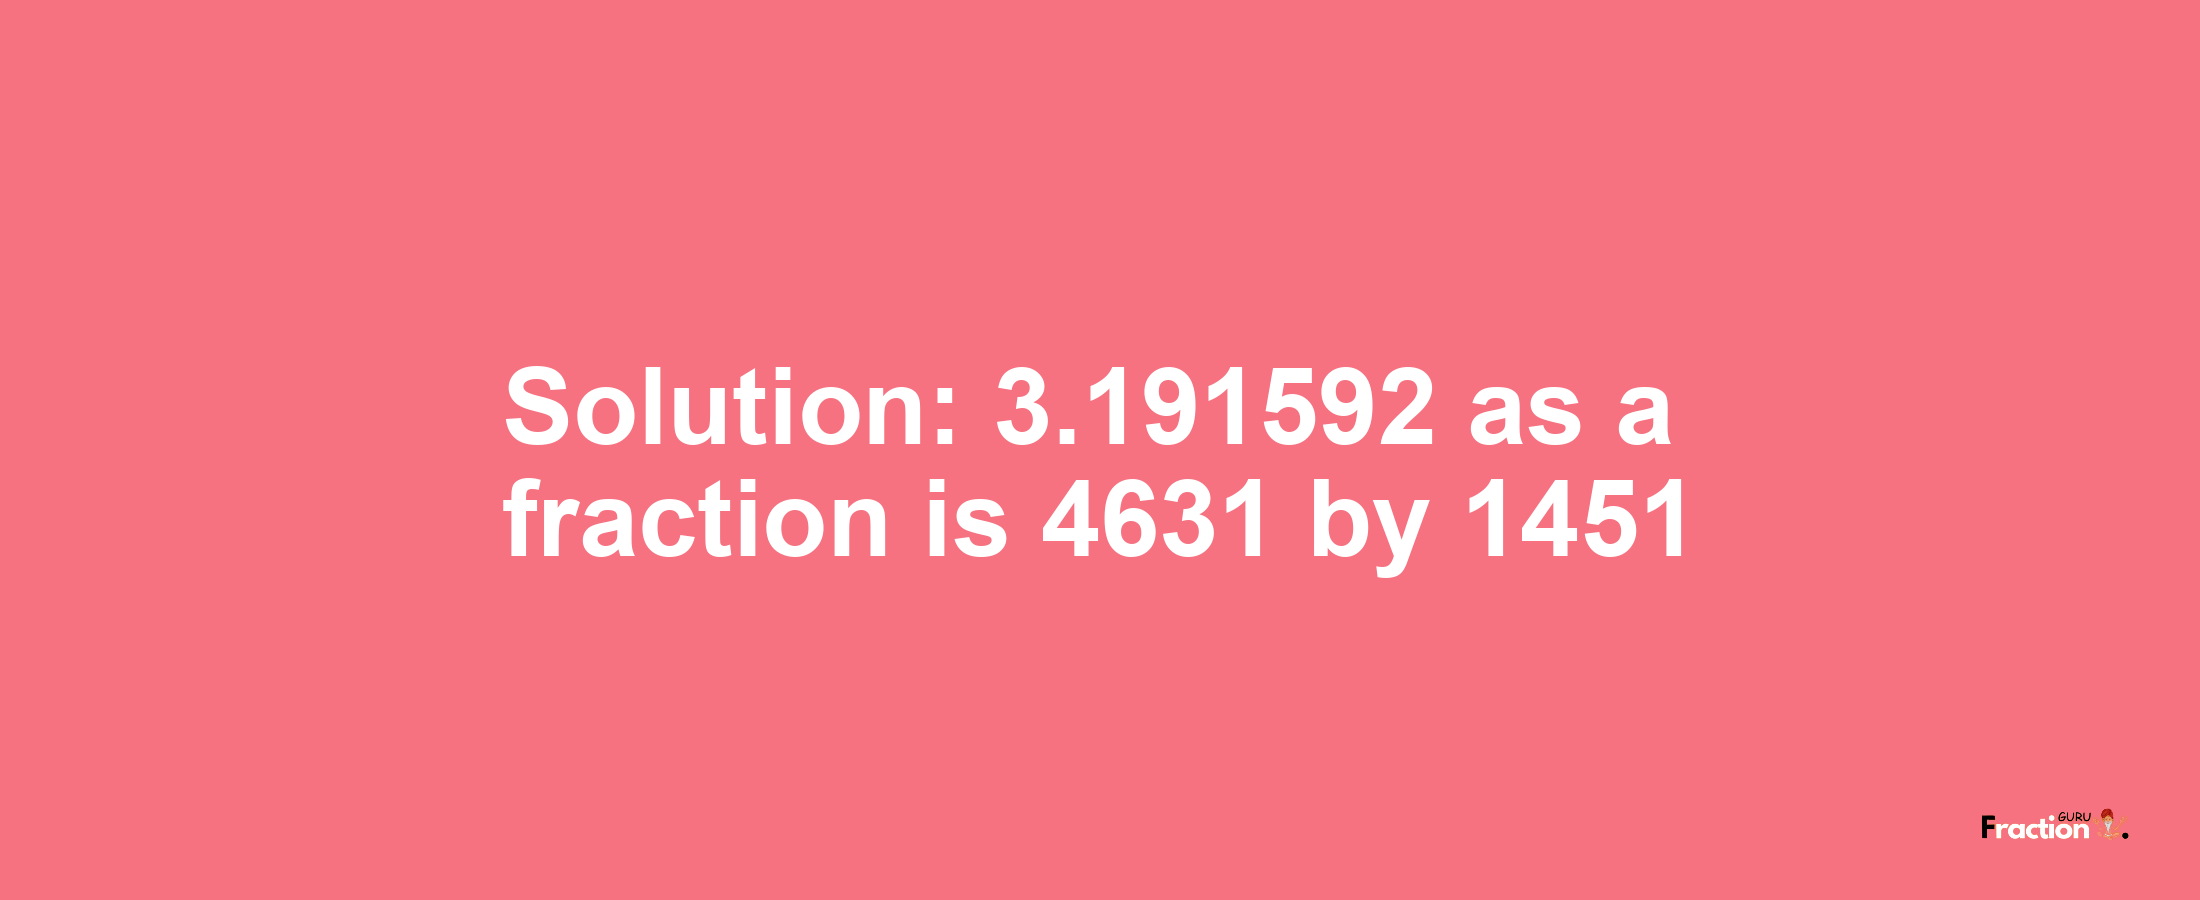 Solution:3.191592 as a fraction is 4631/1451